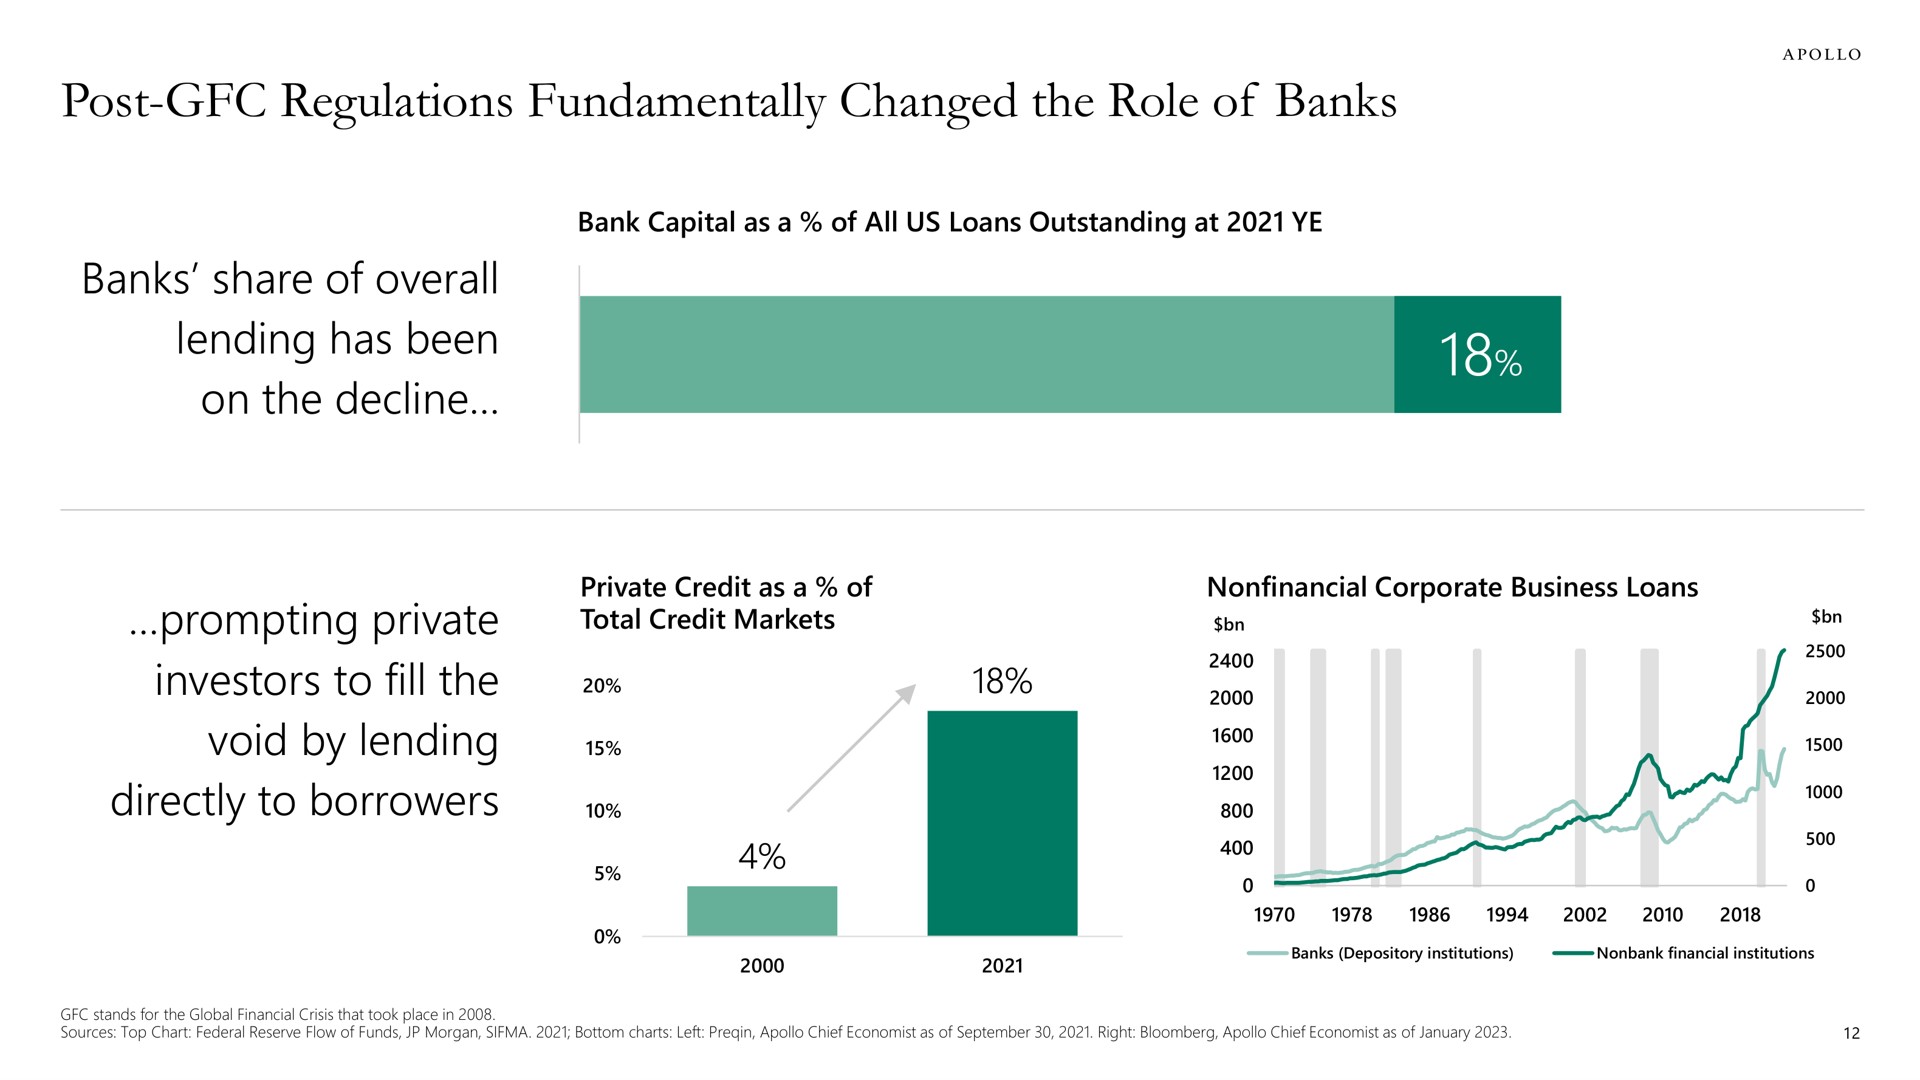 post regulations fundamentally changed the role of banks banks share of overall lending has been on the decline prompting private investors to fill the void by lending directly to borrowers | Apollo Global Management